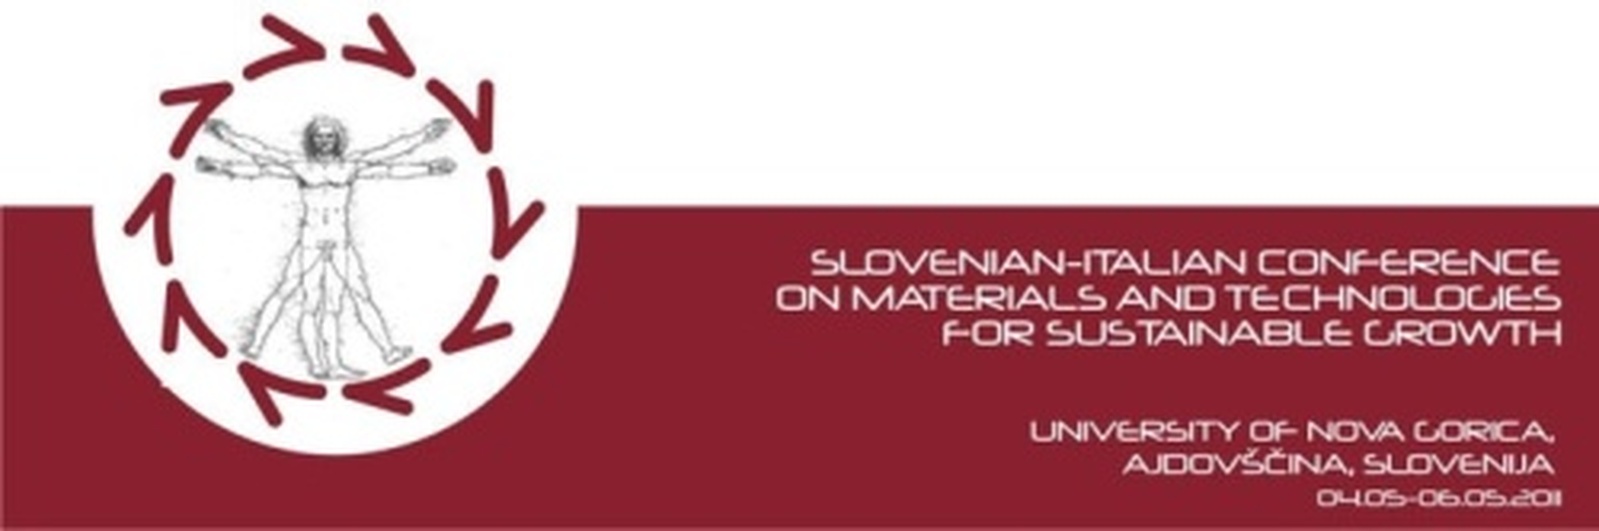 Slovenian-Italian Conference on Materials and Technologies for Sustainable Growth